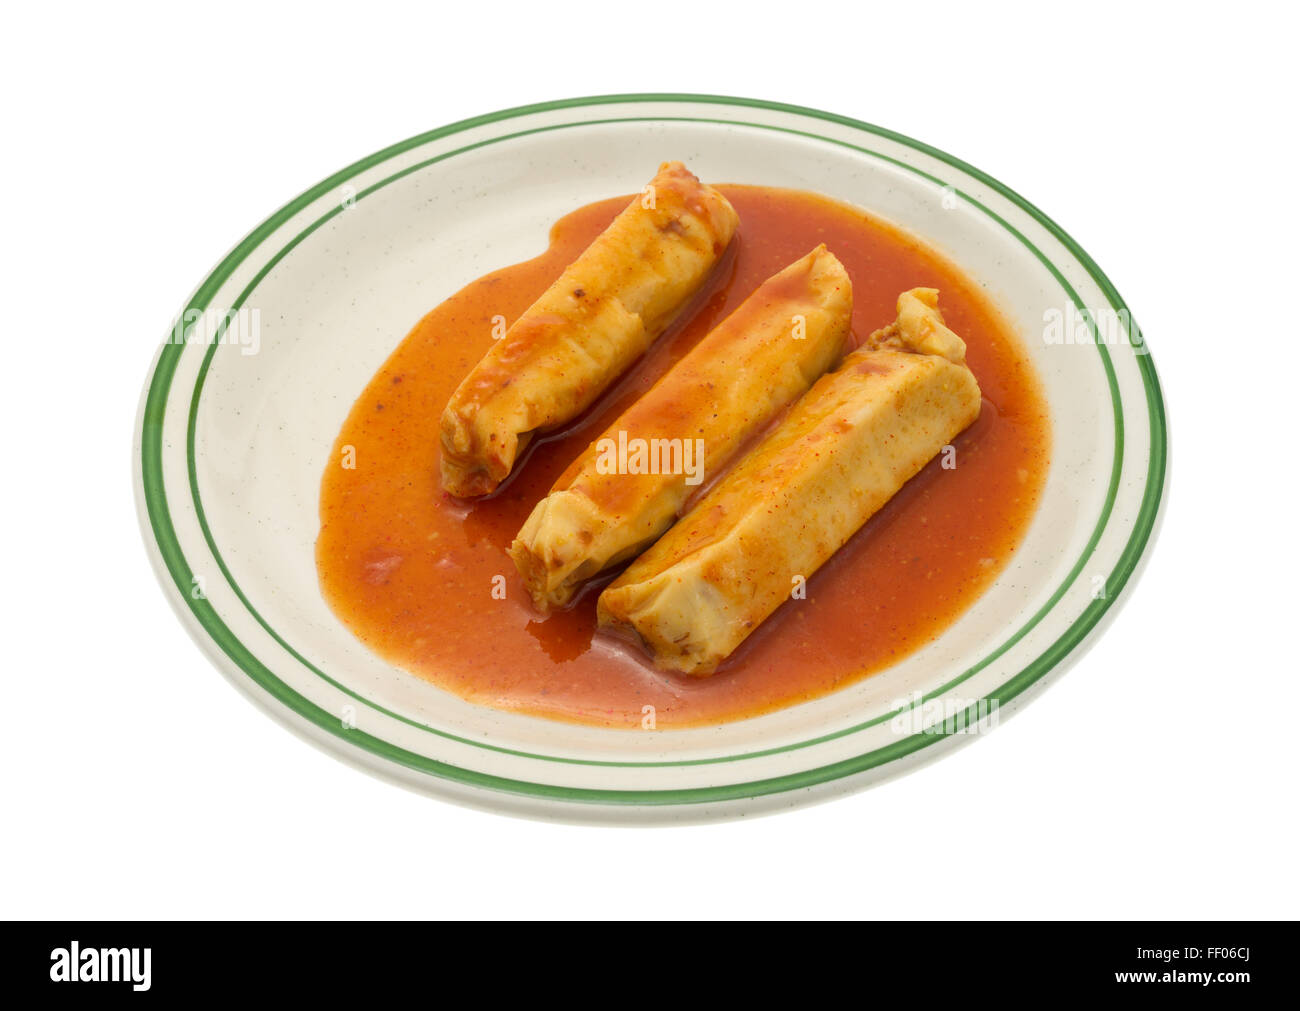 A serving of canned tamales in chili sauce on a plate isolated on a white background. Stock Photo